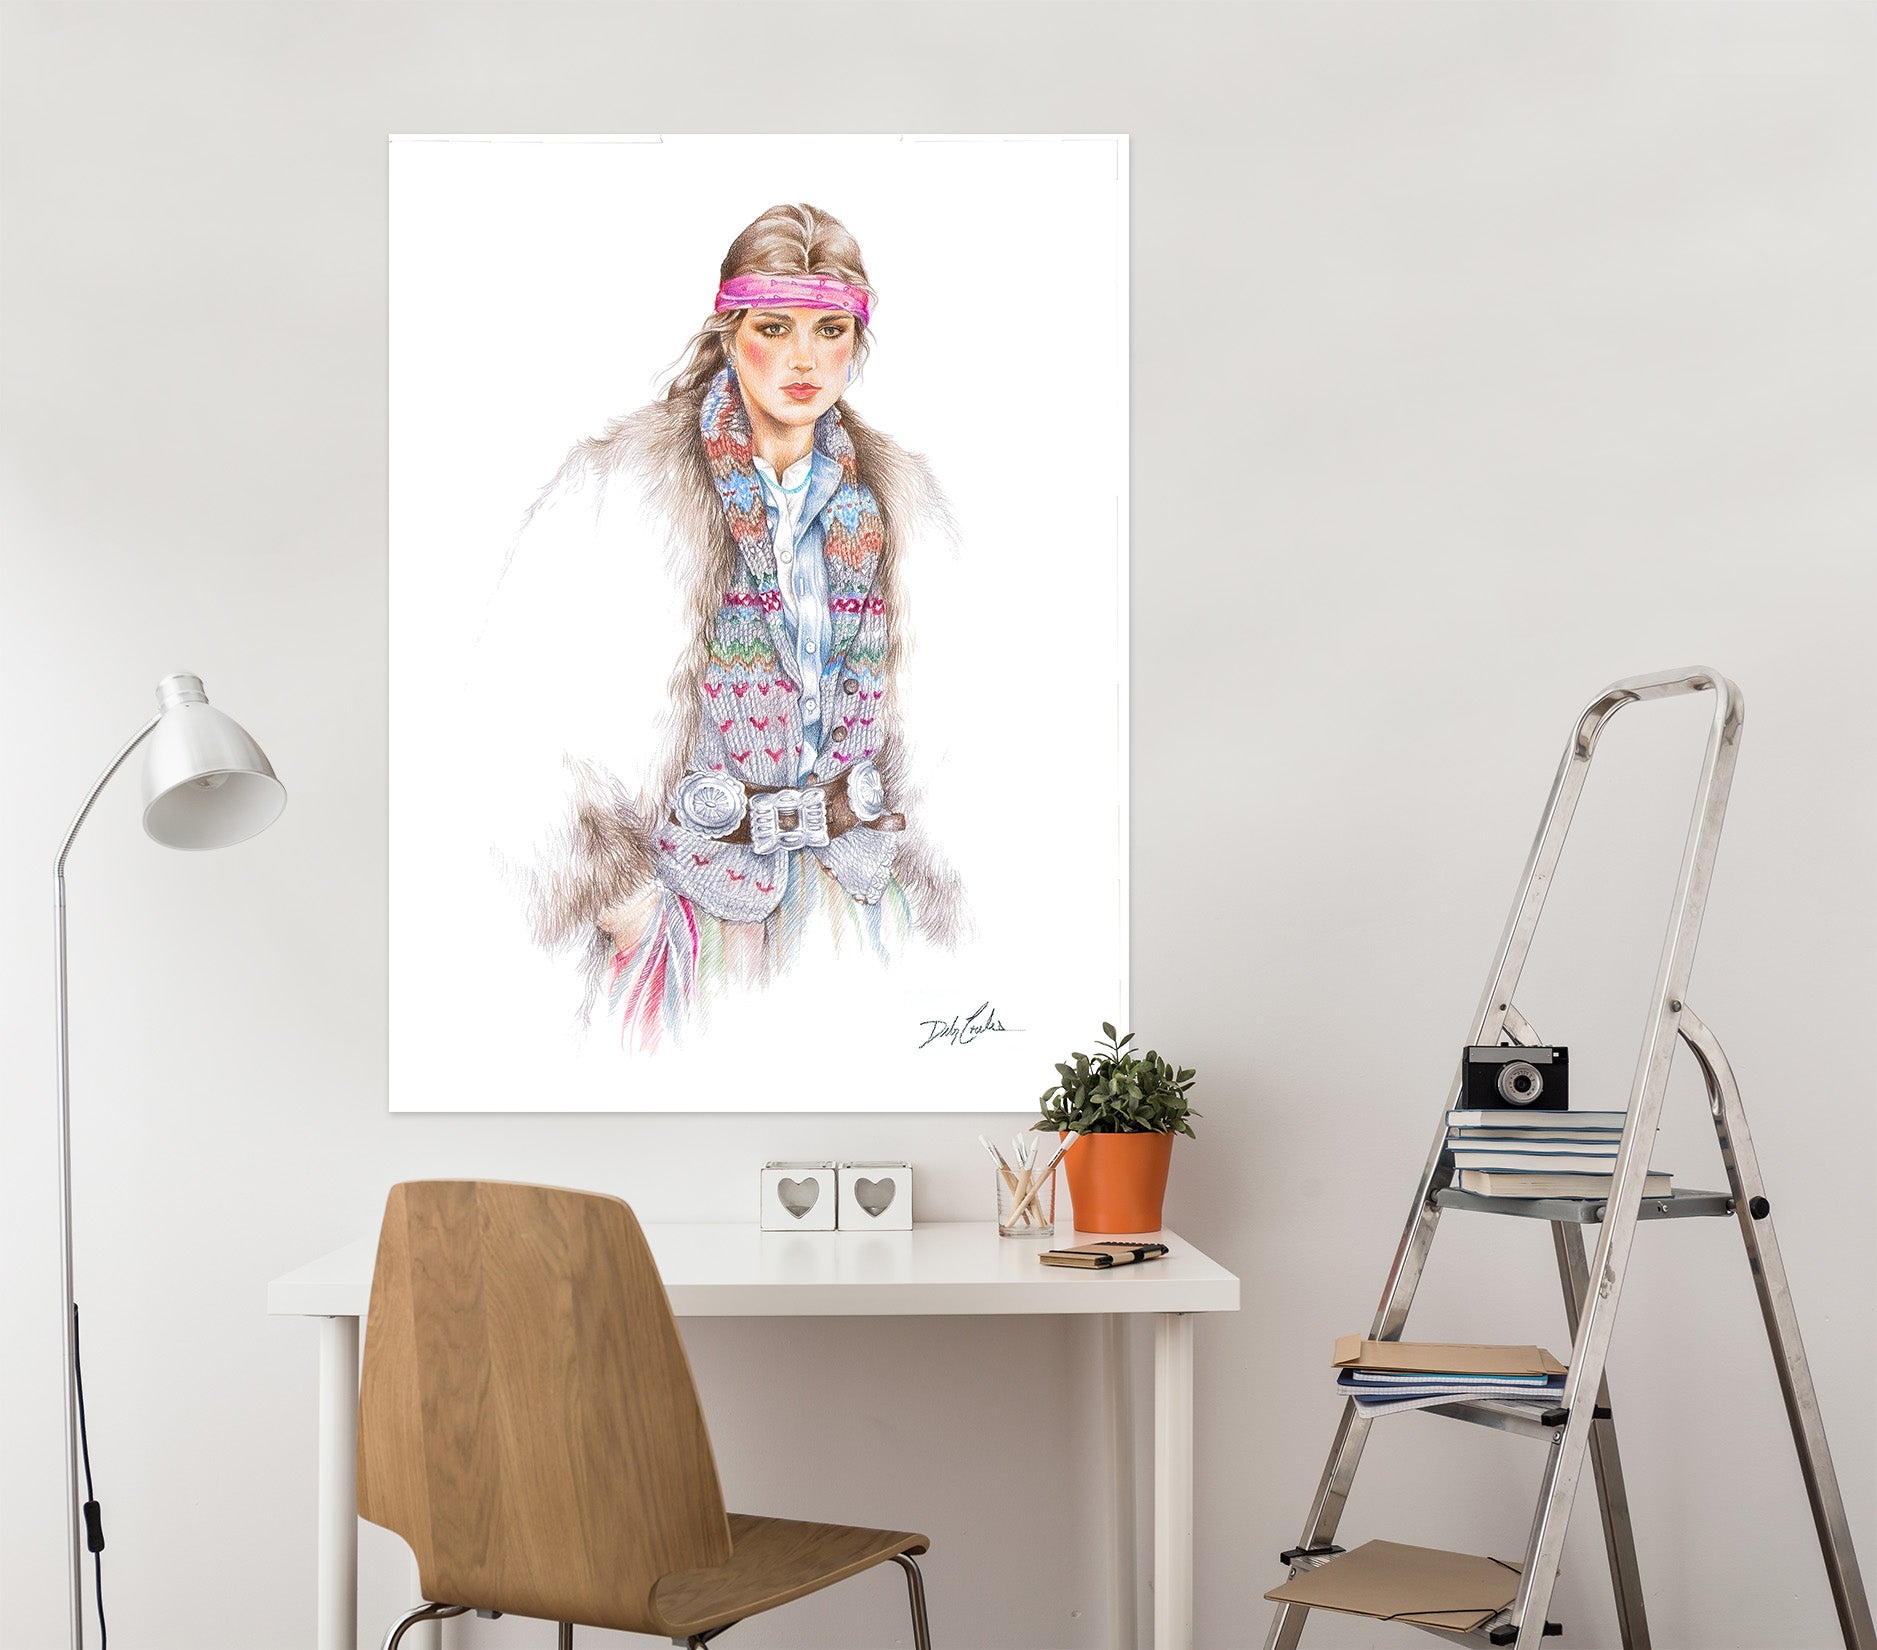 3D Clothing Model 0146 Debi Coules Wall Sticker